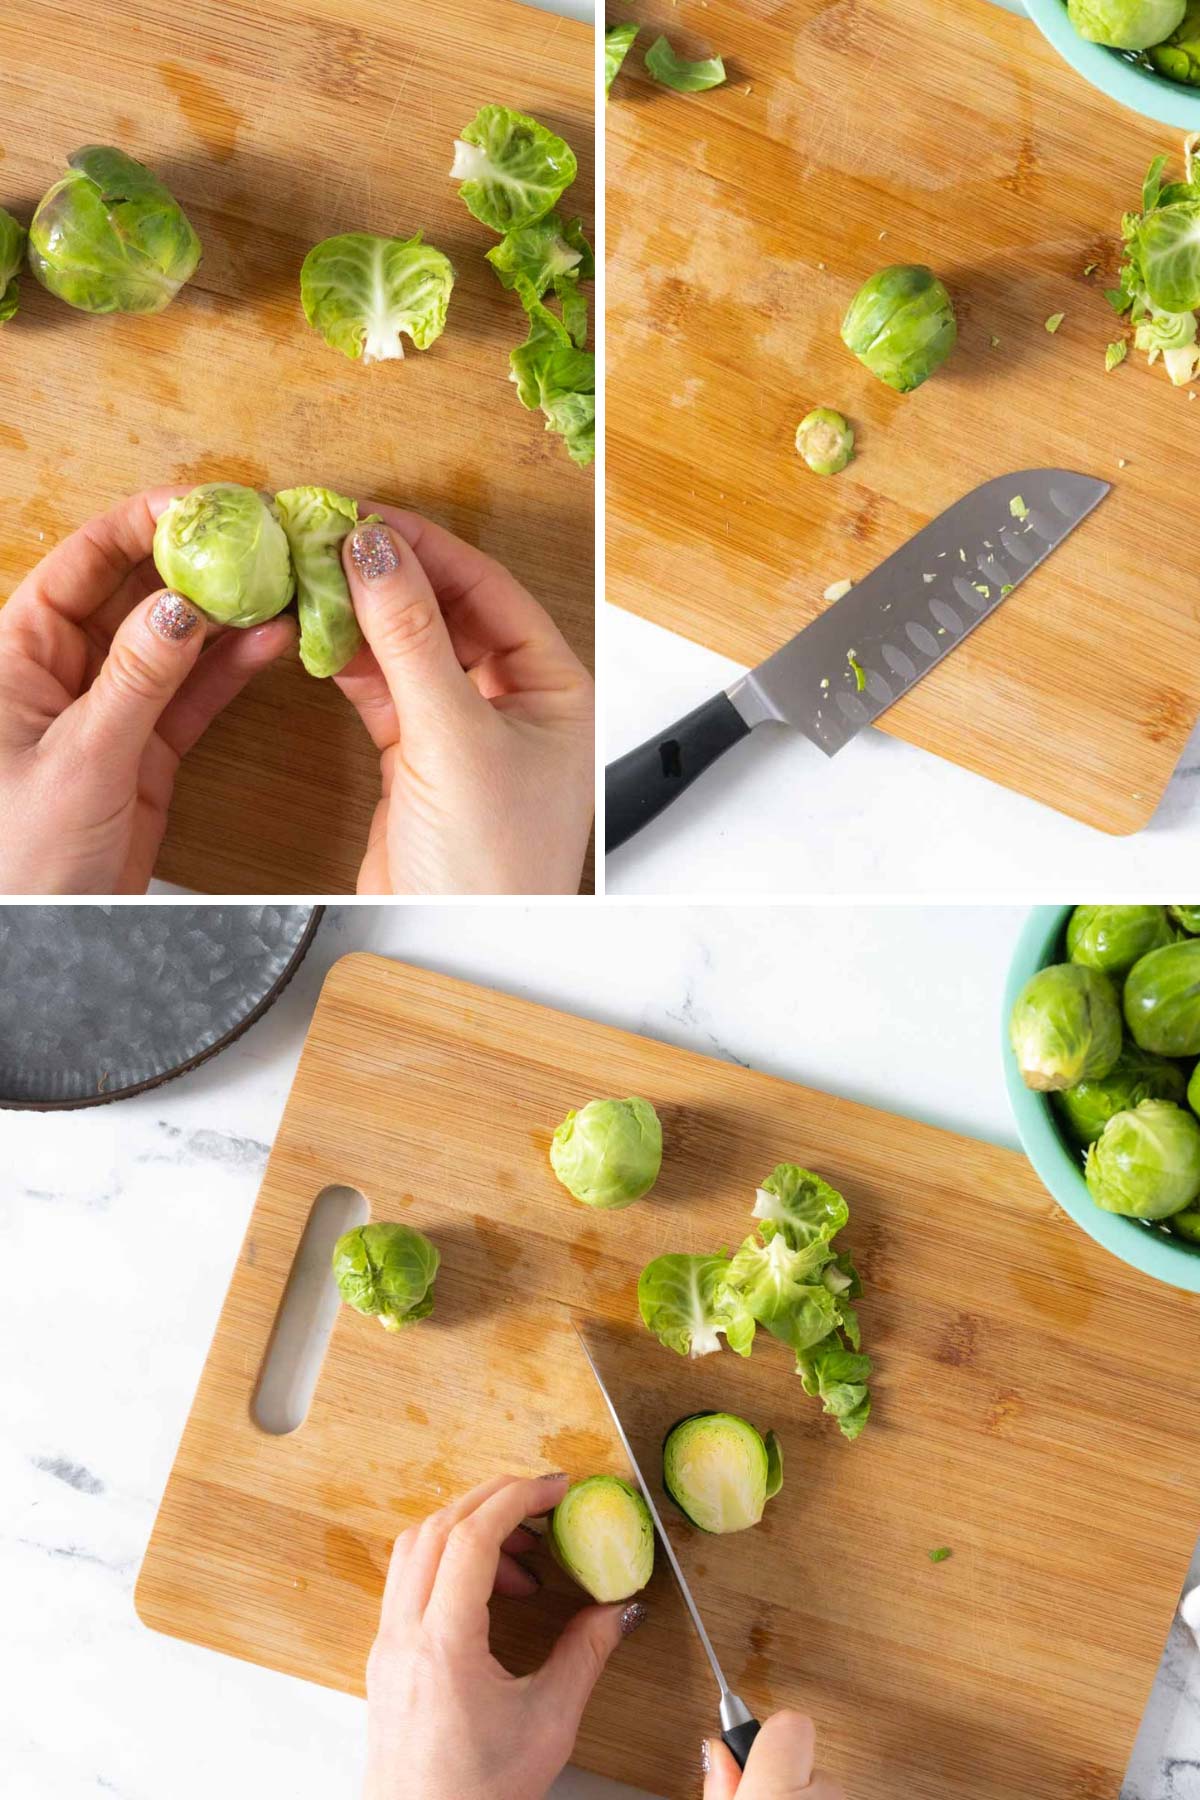 Person cleaning and trimming brussels sprouts before cooking.